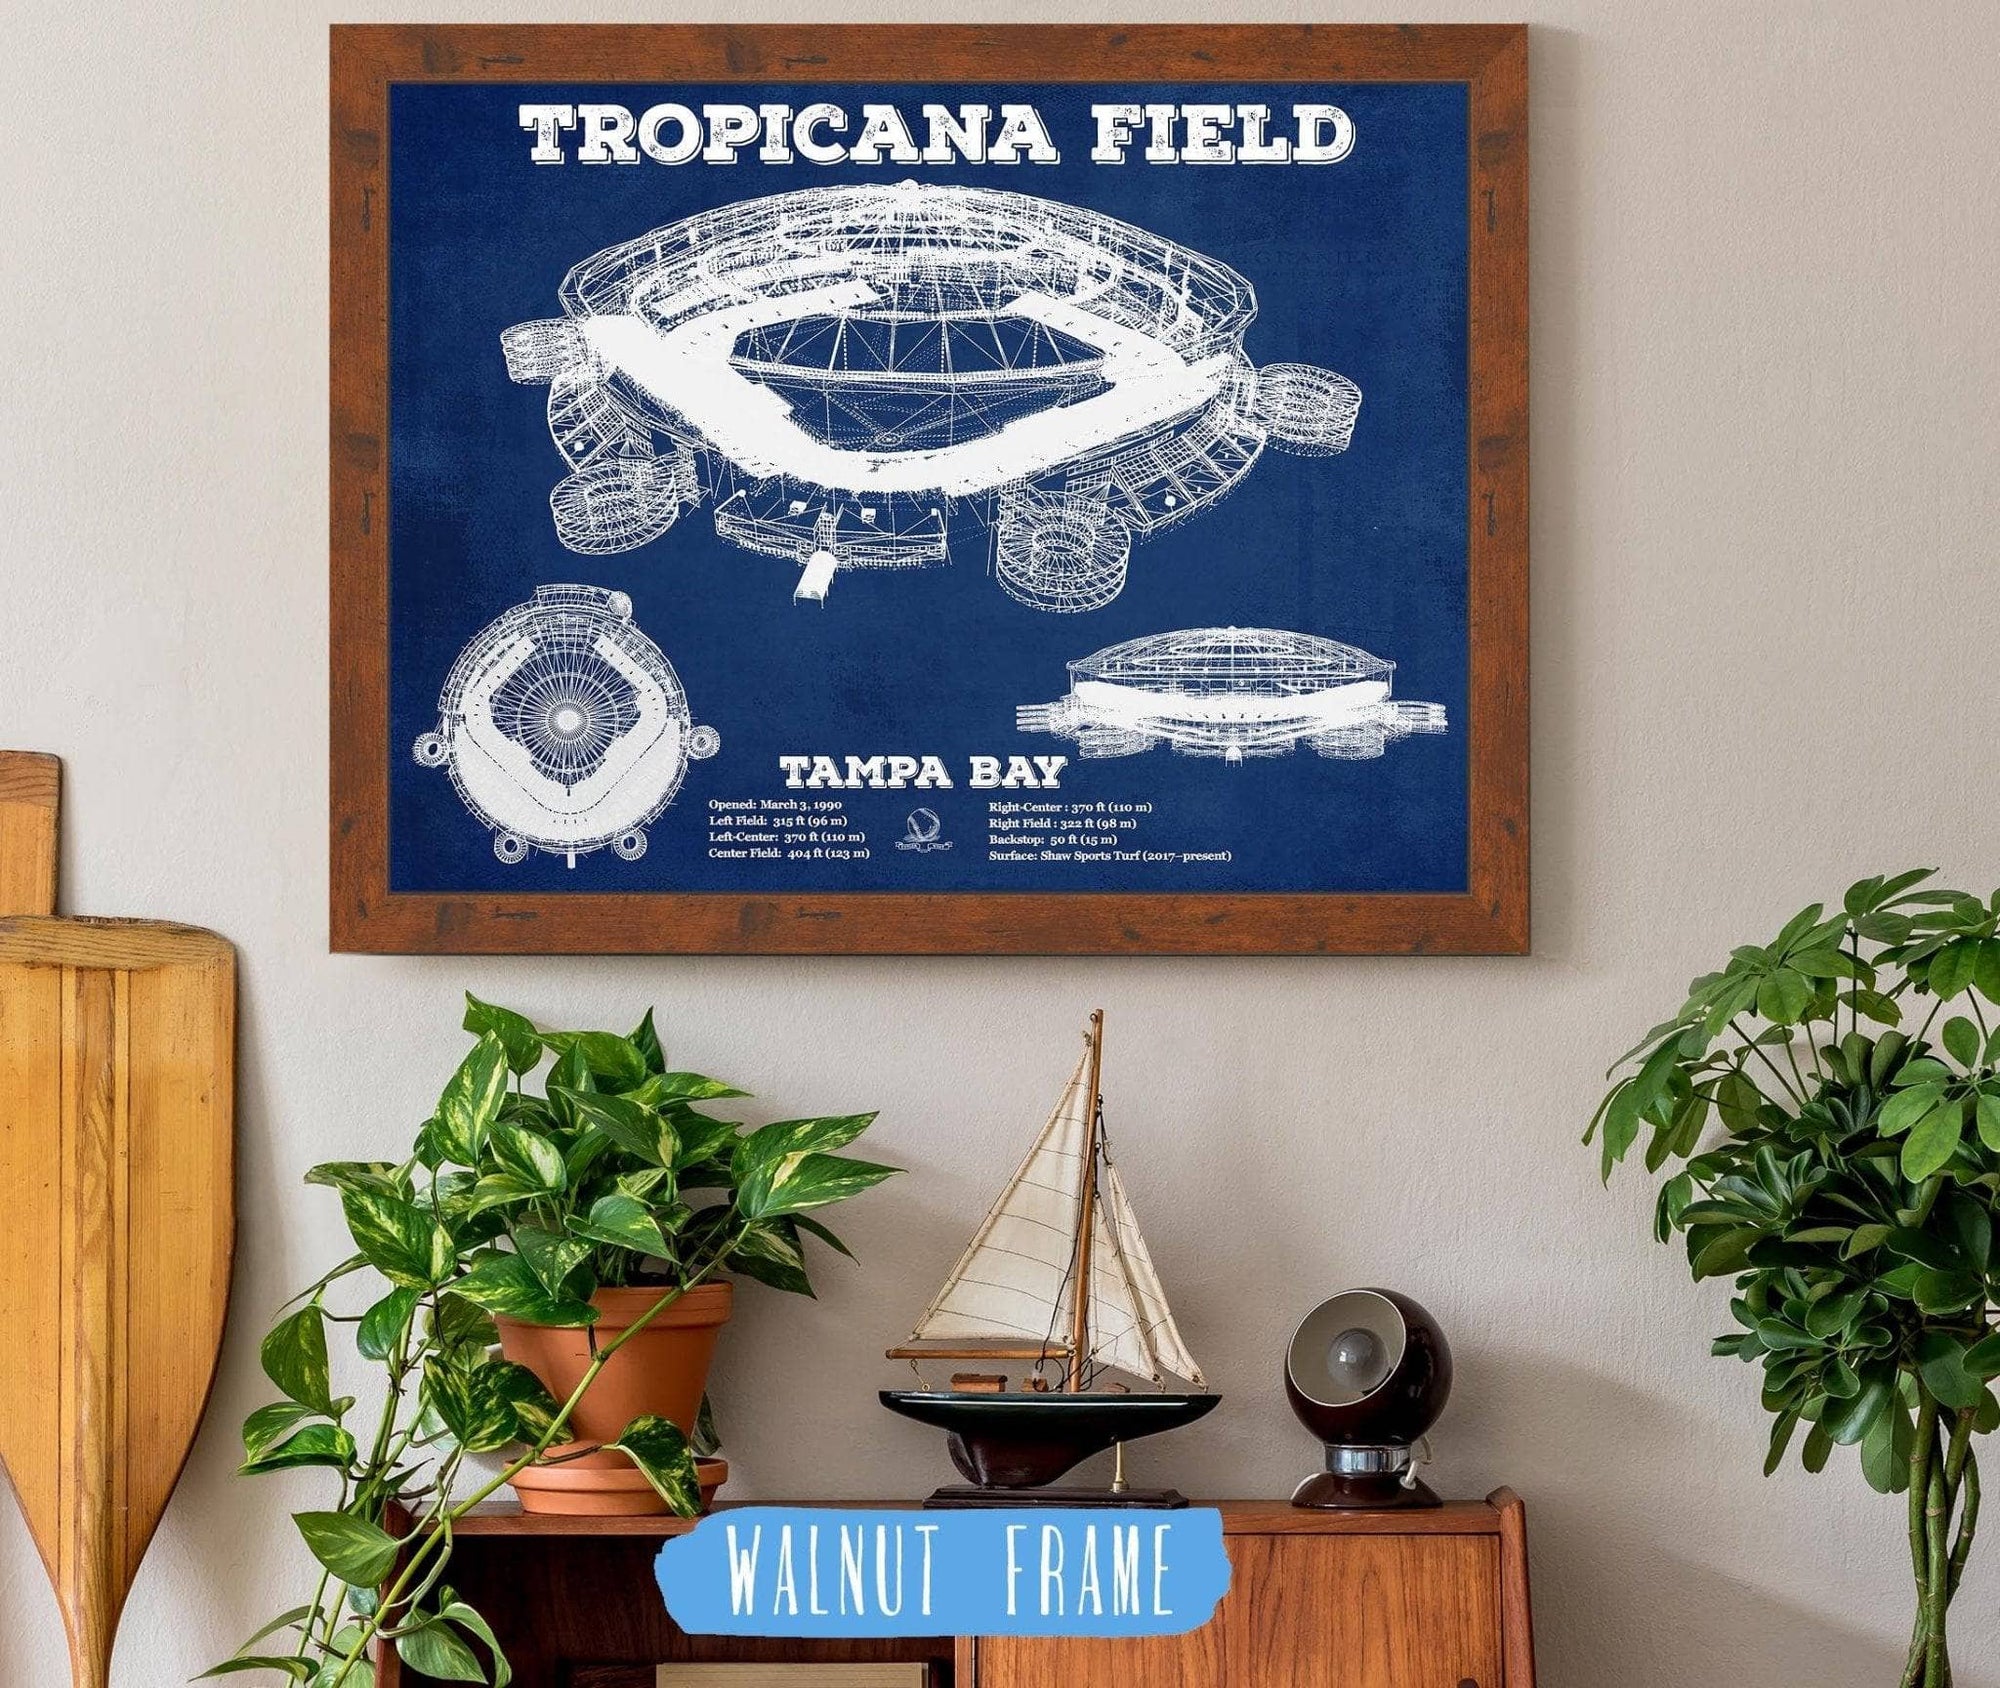 Cutler West Baseball Collection 14" x 11" / Walnut Frame Tampa Bay Rays Tropicana Field Vintage Wall Art 845000154_8842